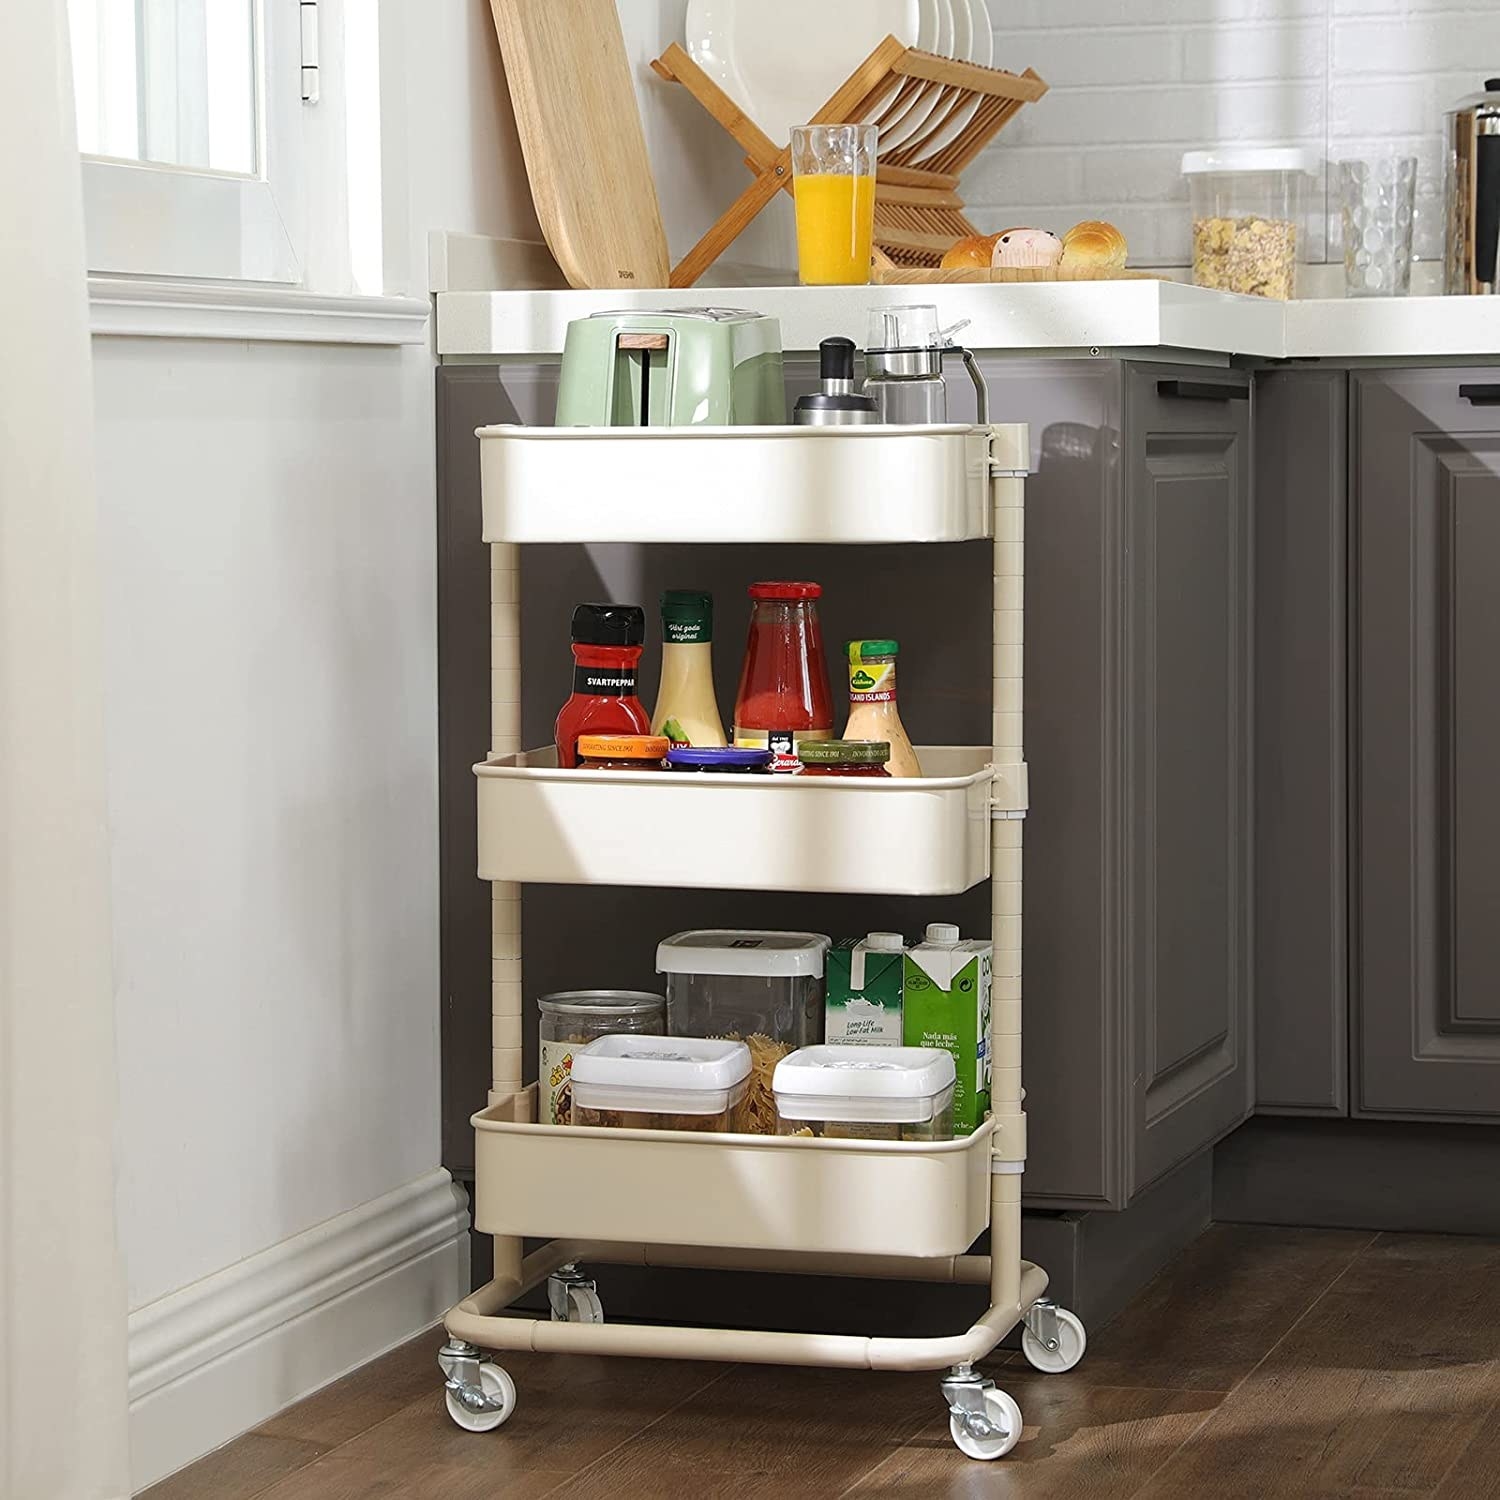 The 3-tier metal utility cart in a kitchen, holding things like a toaster, bottles of sauce, containers of food, and other kitchen items.